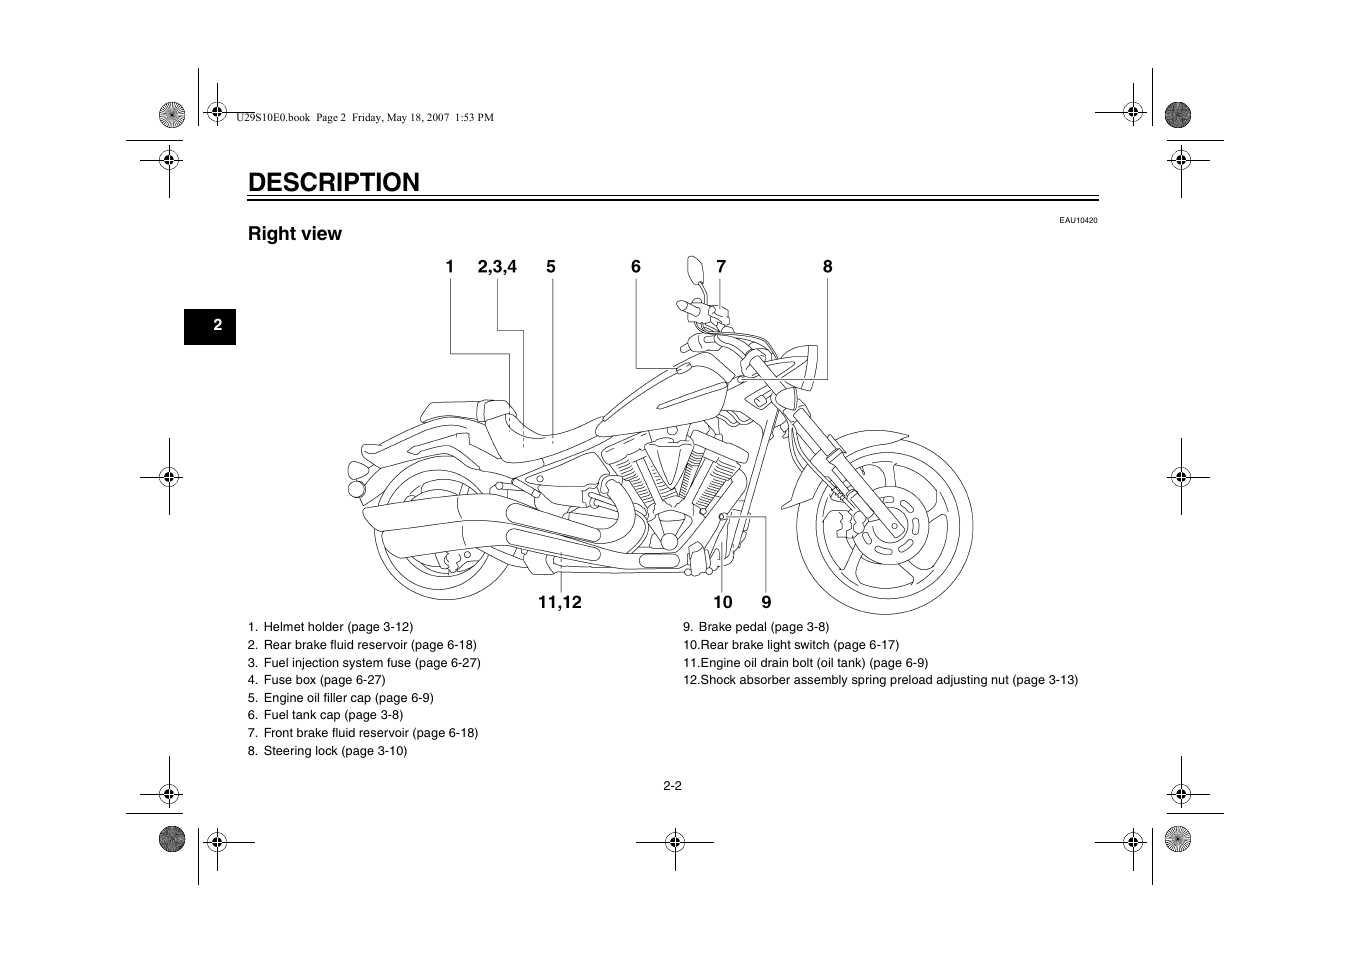 Right view, Right view -2, Description | Yamaha STAR XV19CX(C) User Manual | Page 16 / 96